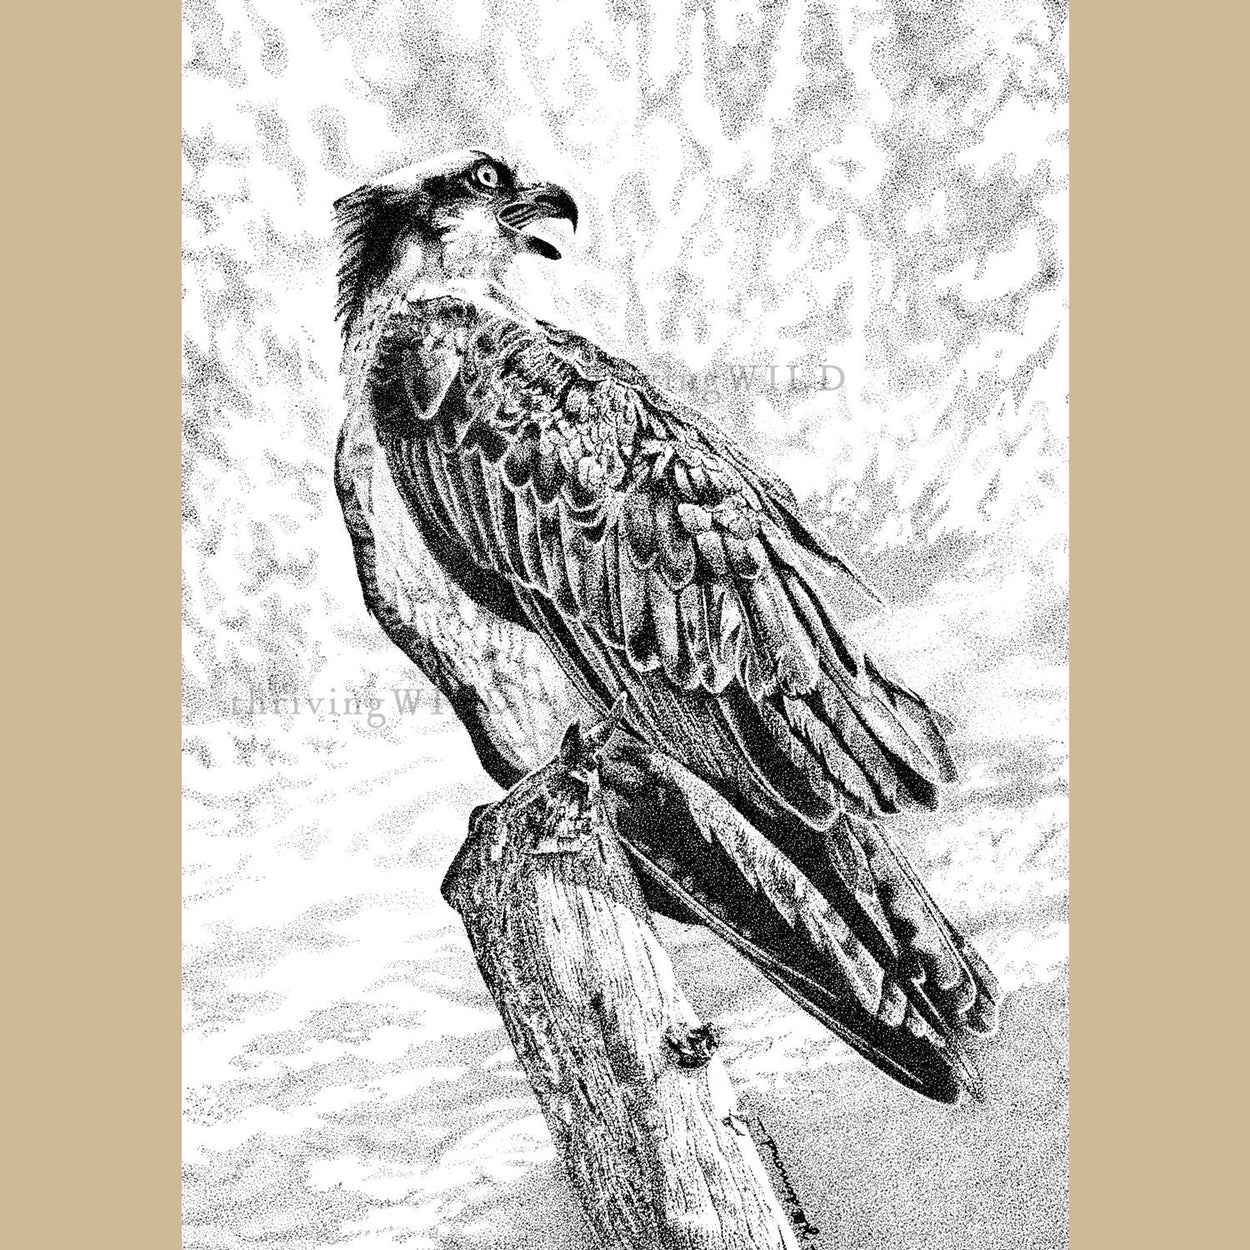 Osprey Pen Stippling Drawing - The Thriving Wild